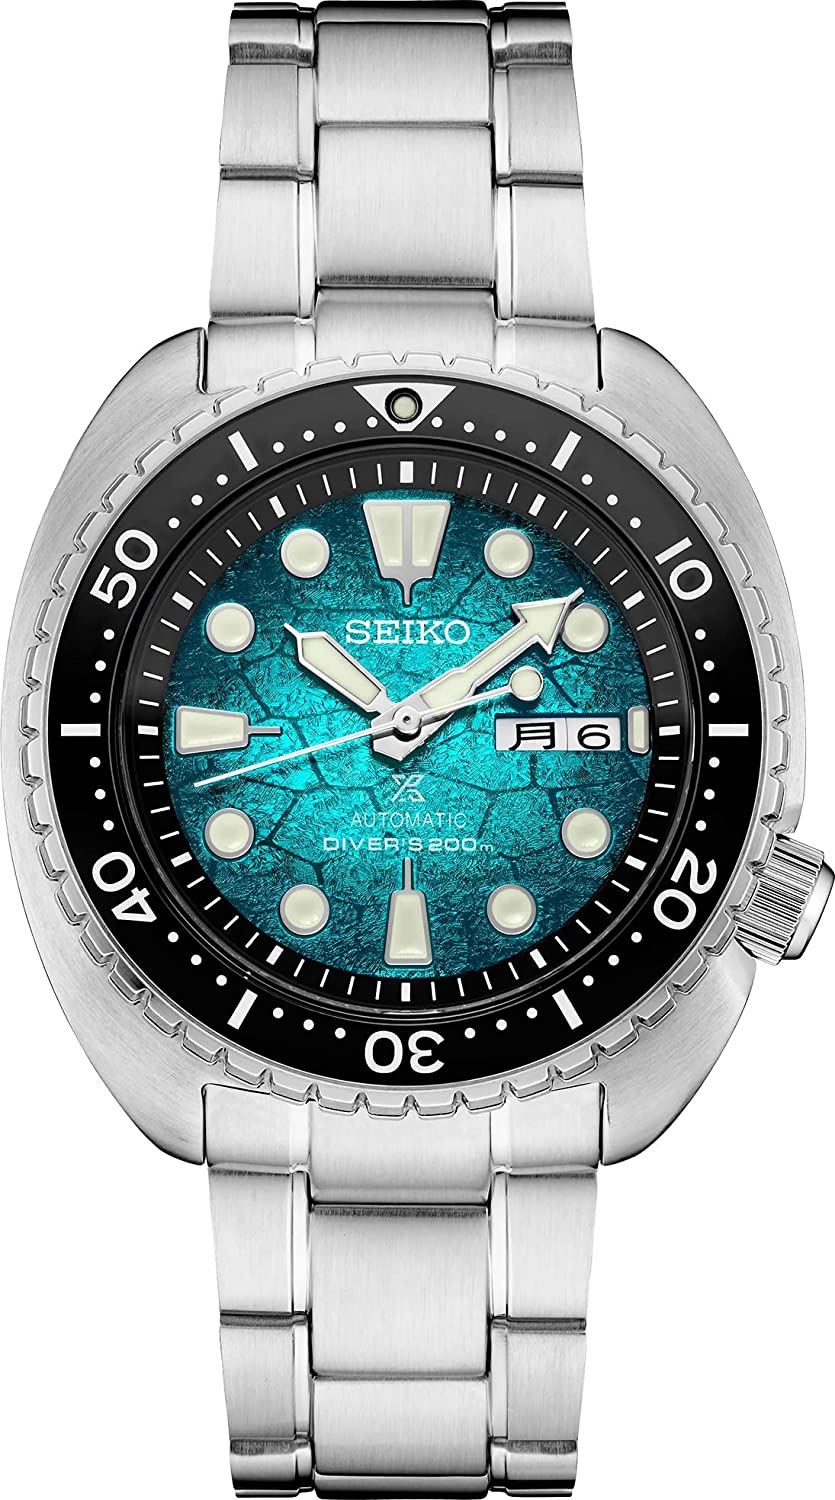 Seiko Prospex US Special Edition Ocean Conservation Turtle Diver 200m Automatic Turquoise Dial Watch SRPH57